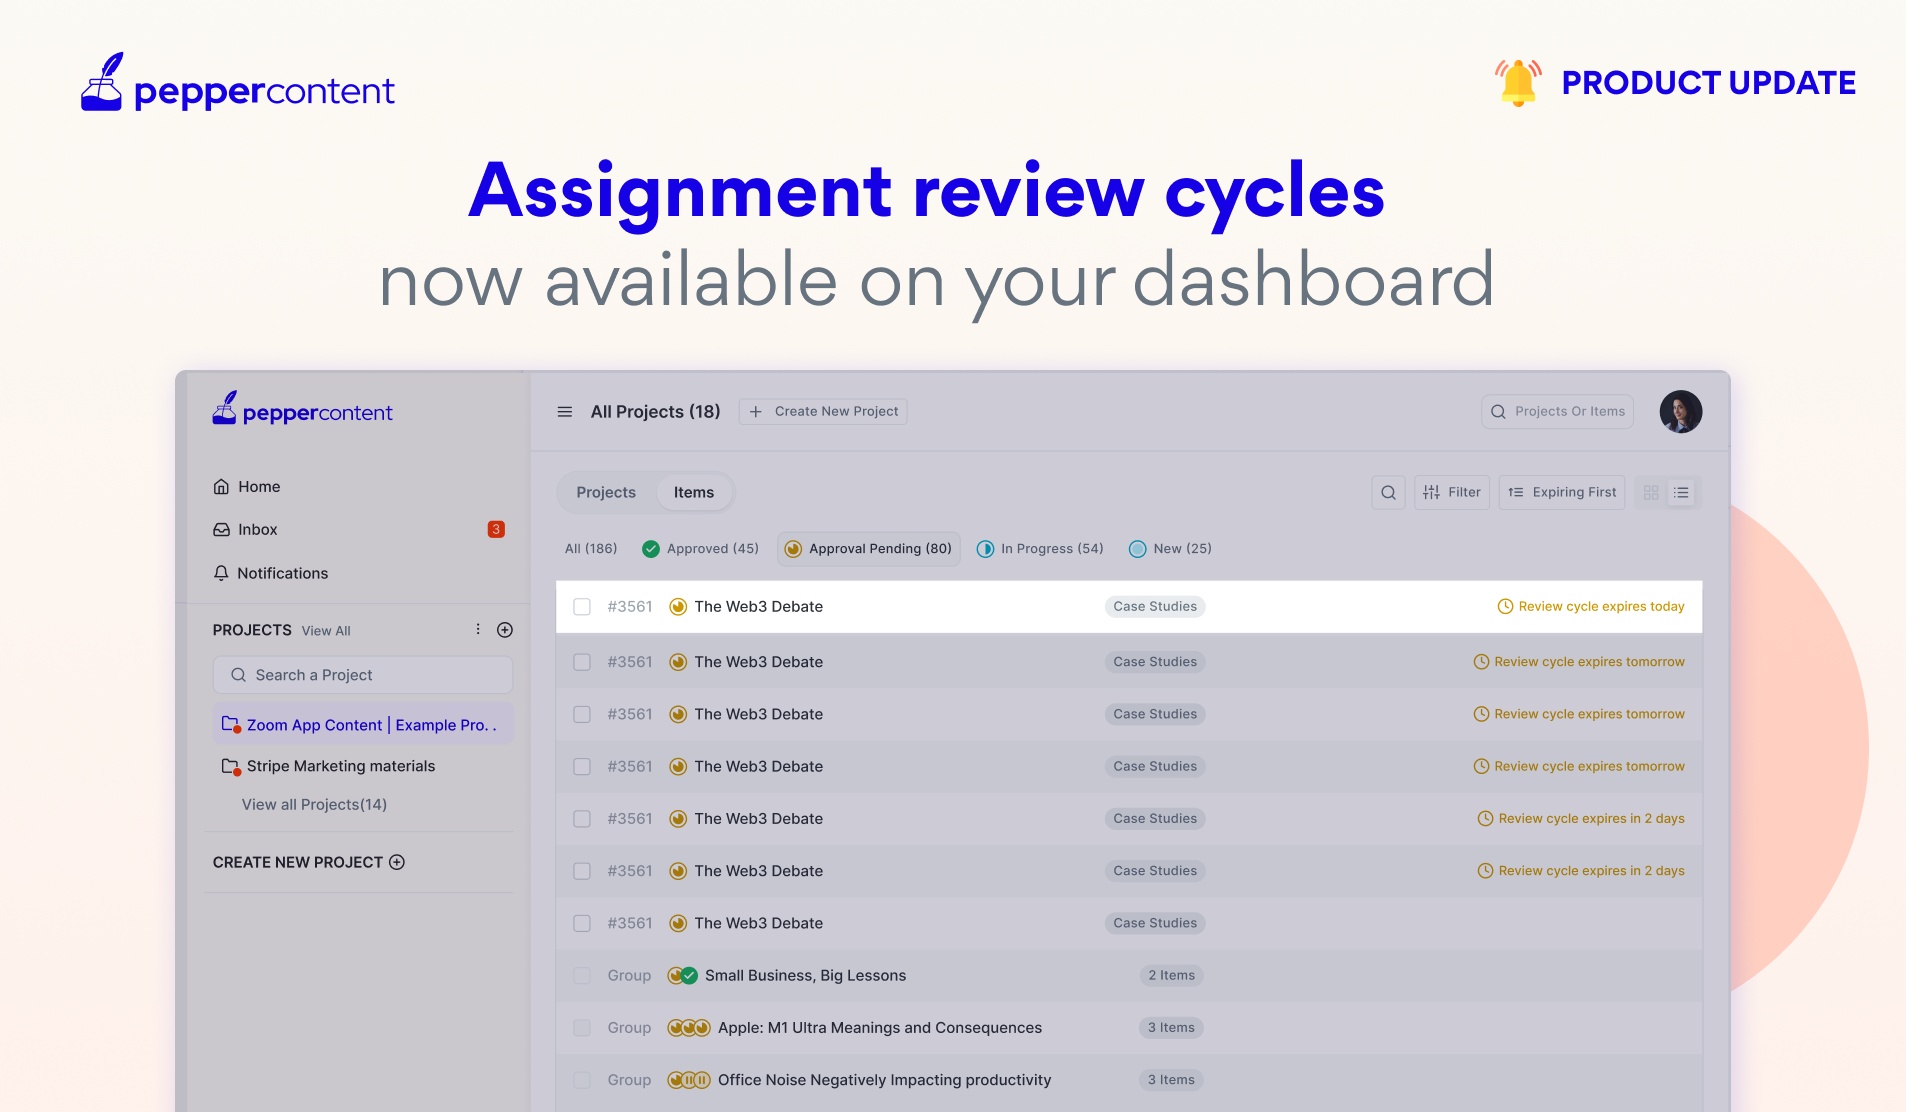 View the assignment review cycle right next to it 🕞 